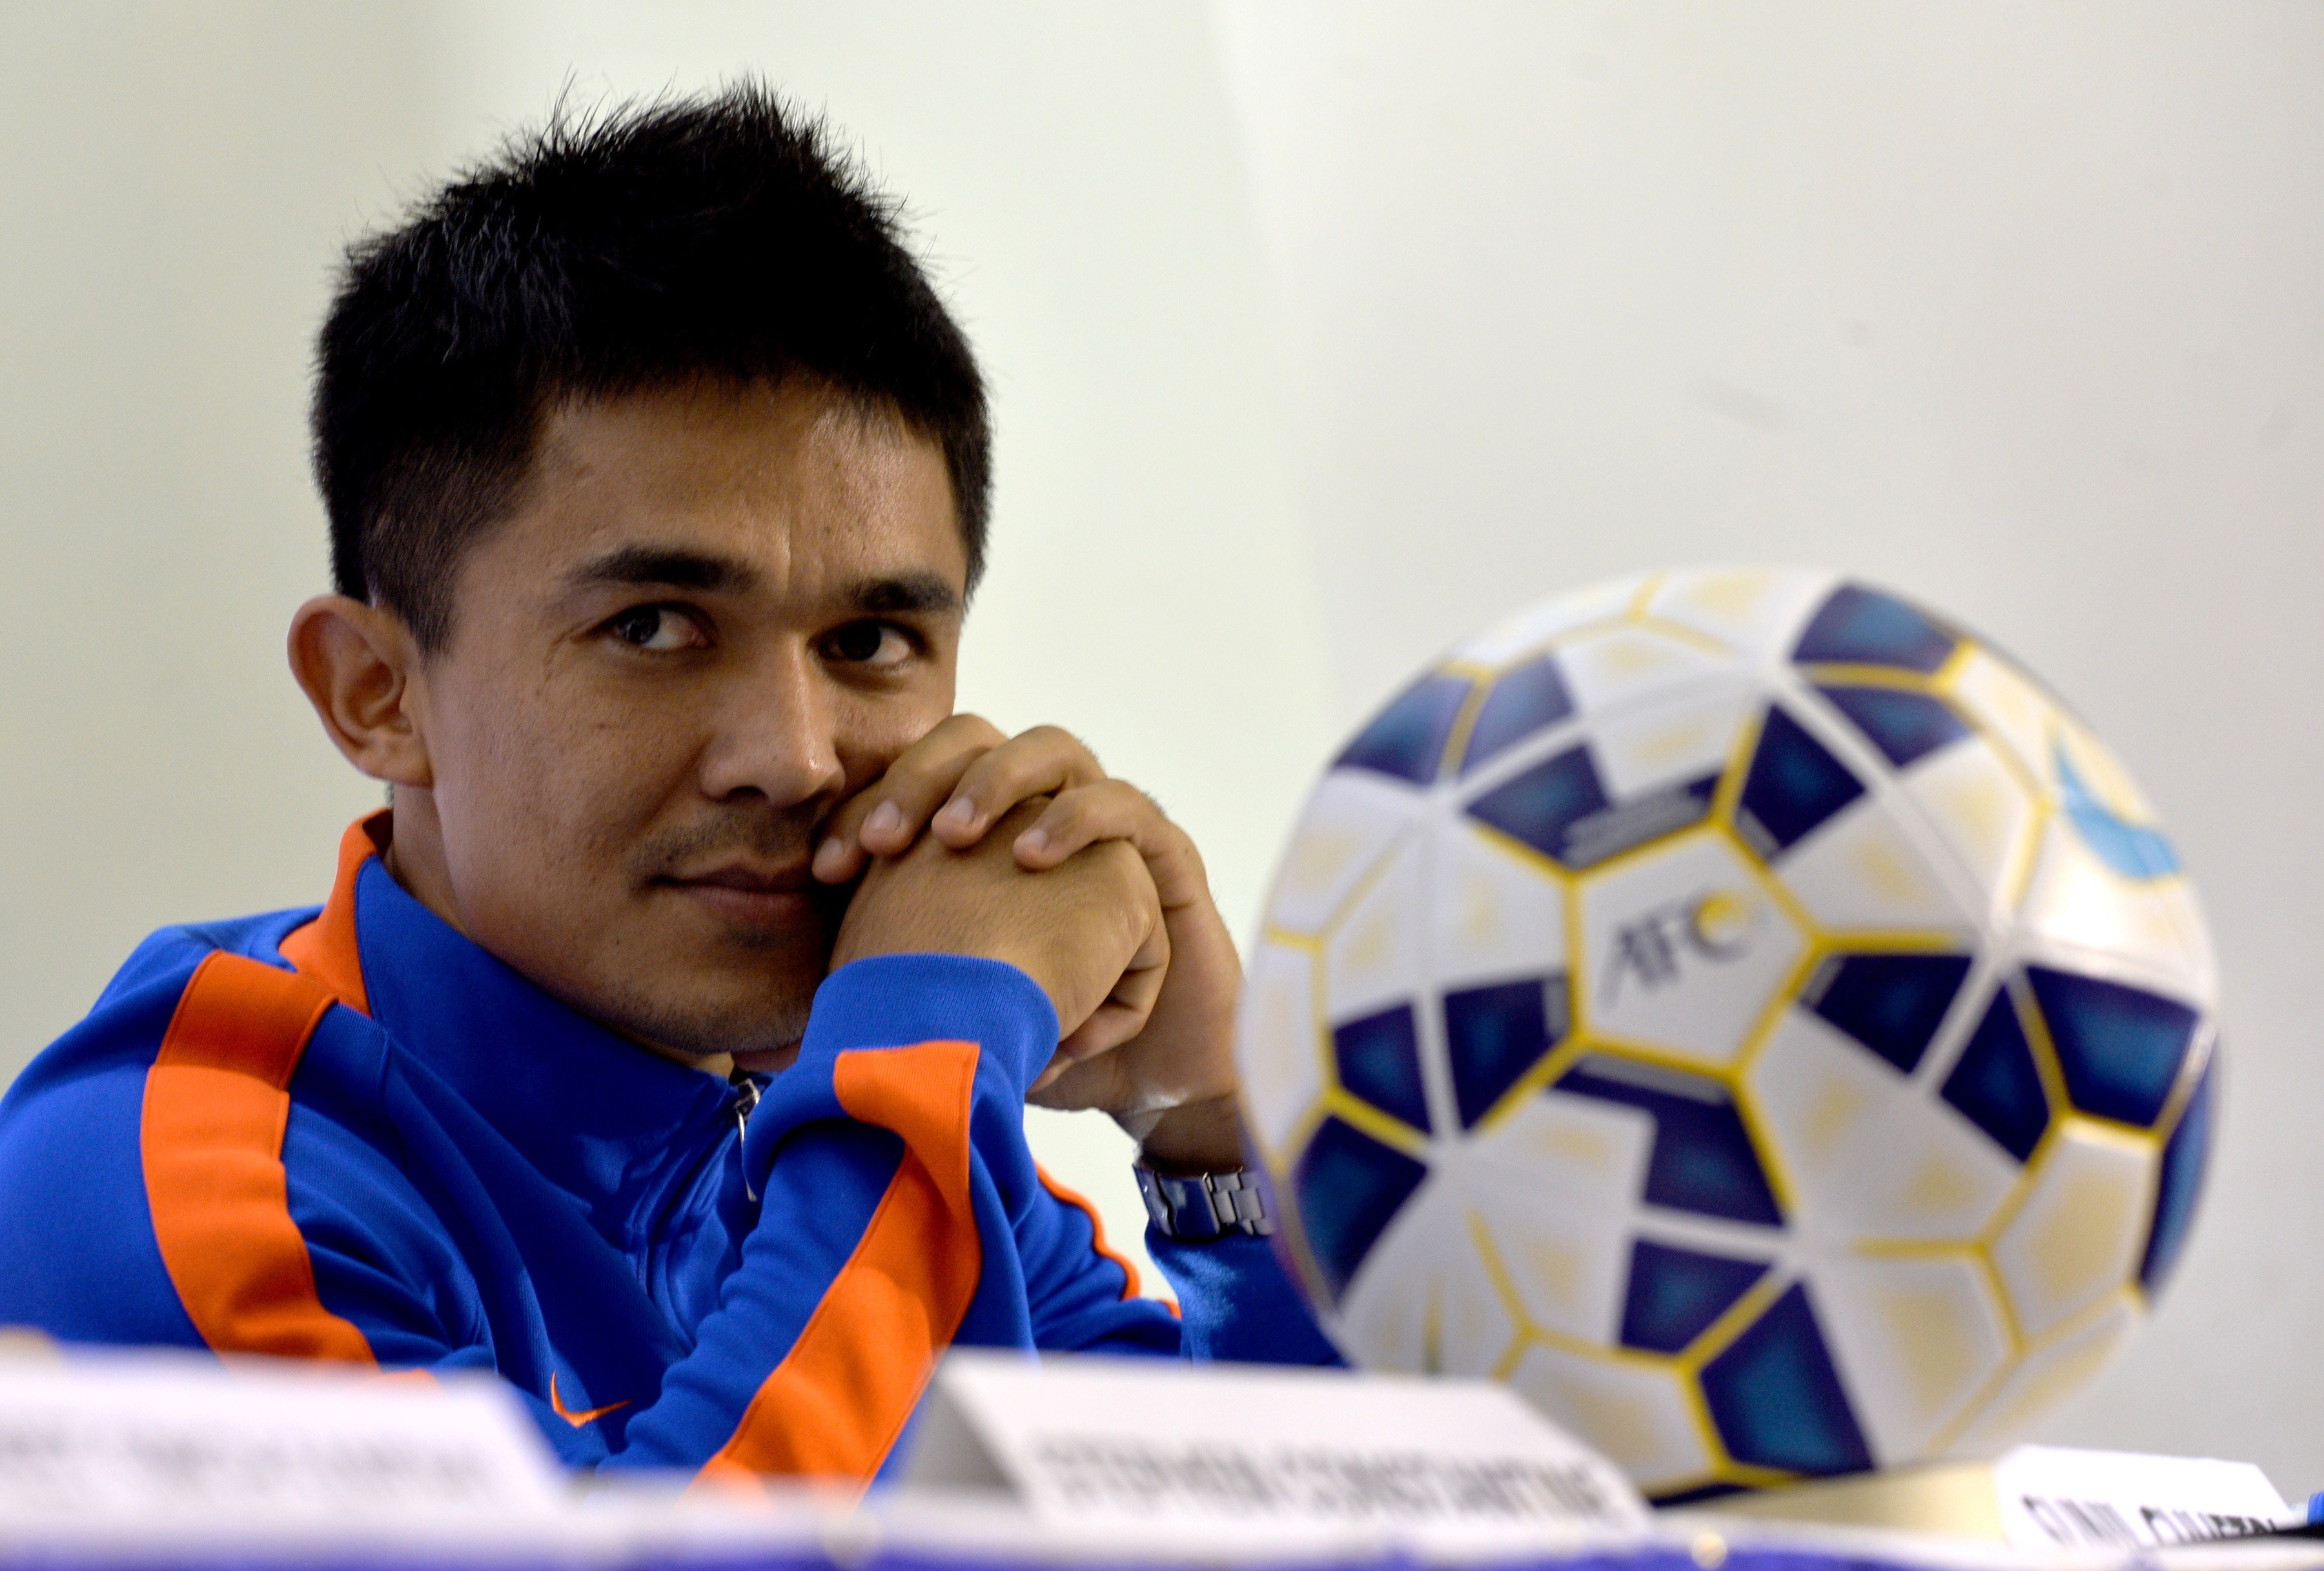 India's fortunes hinge largely on the output of Sunil Chhetri. (Photo by Manjunath Kiran/AFP/Getty Images)